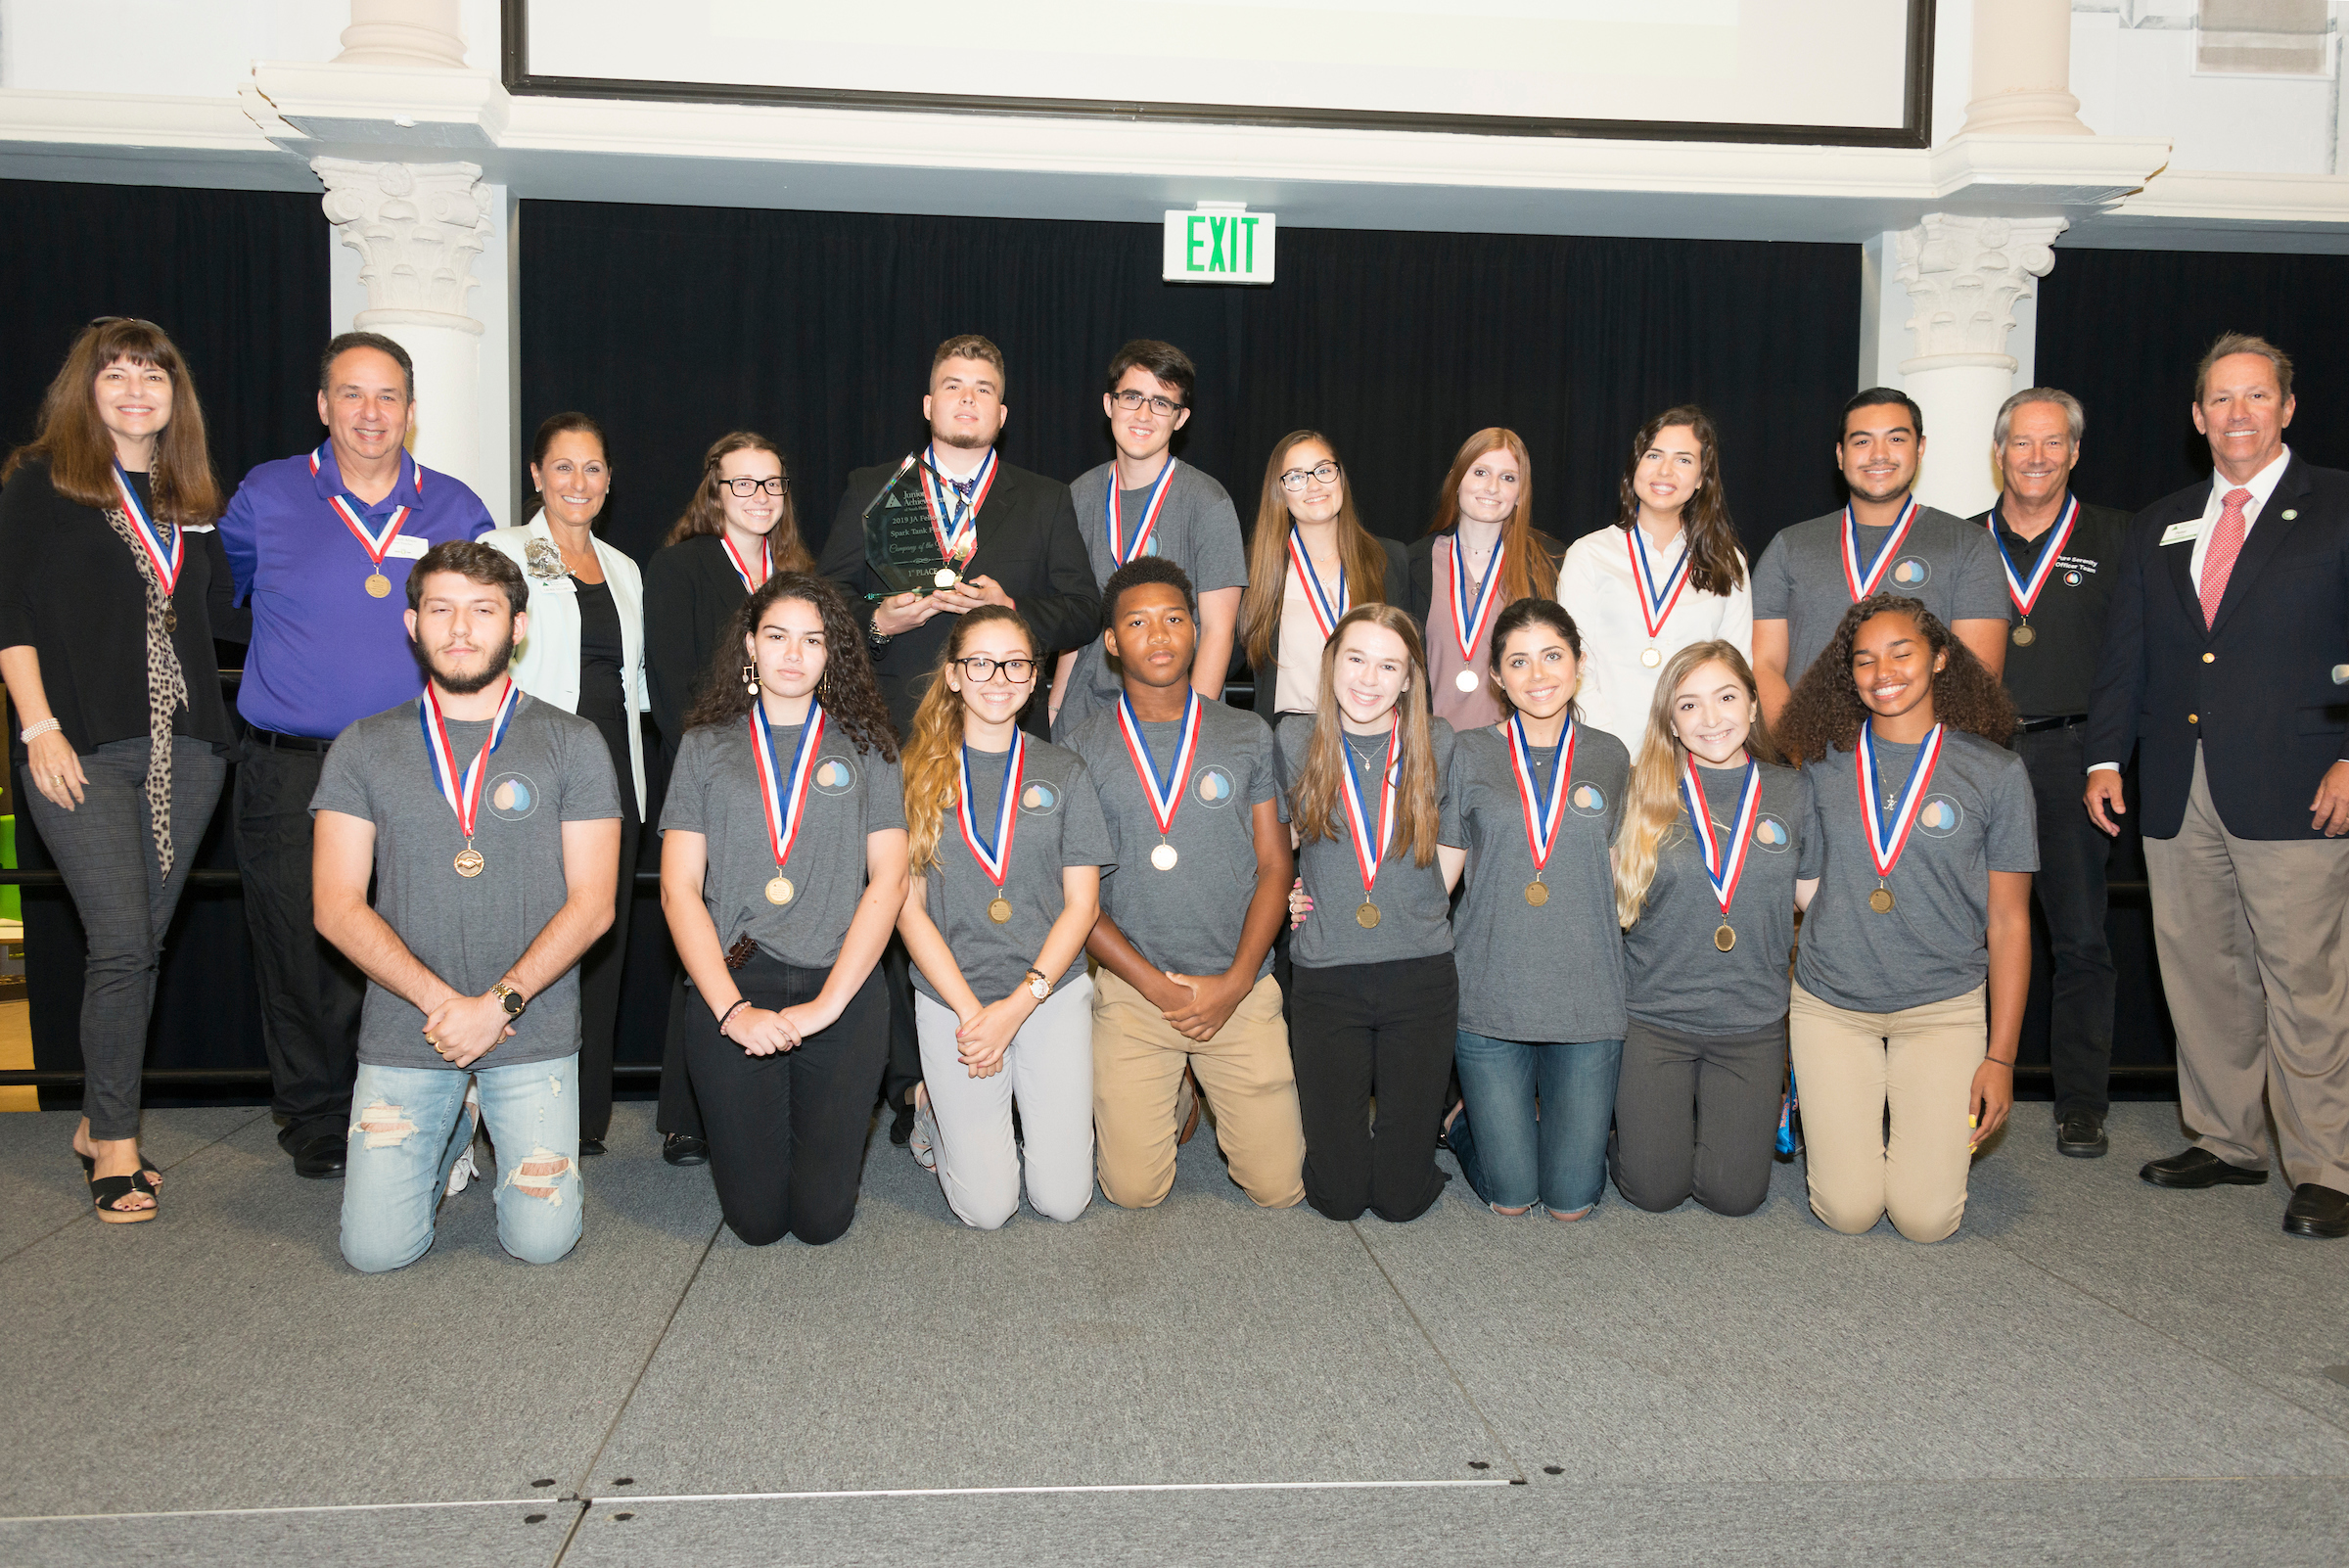 Two Schools Compete at National Student Leadership Summit